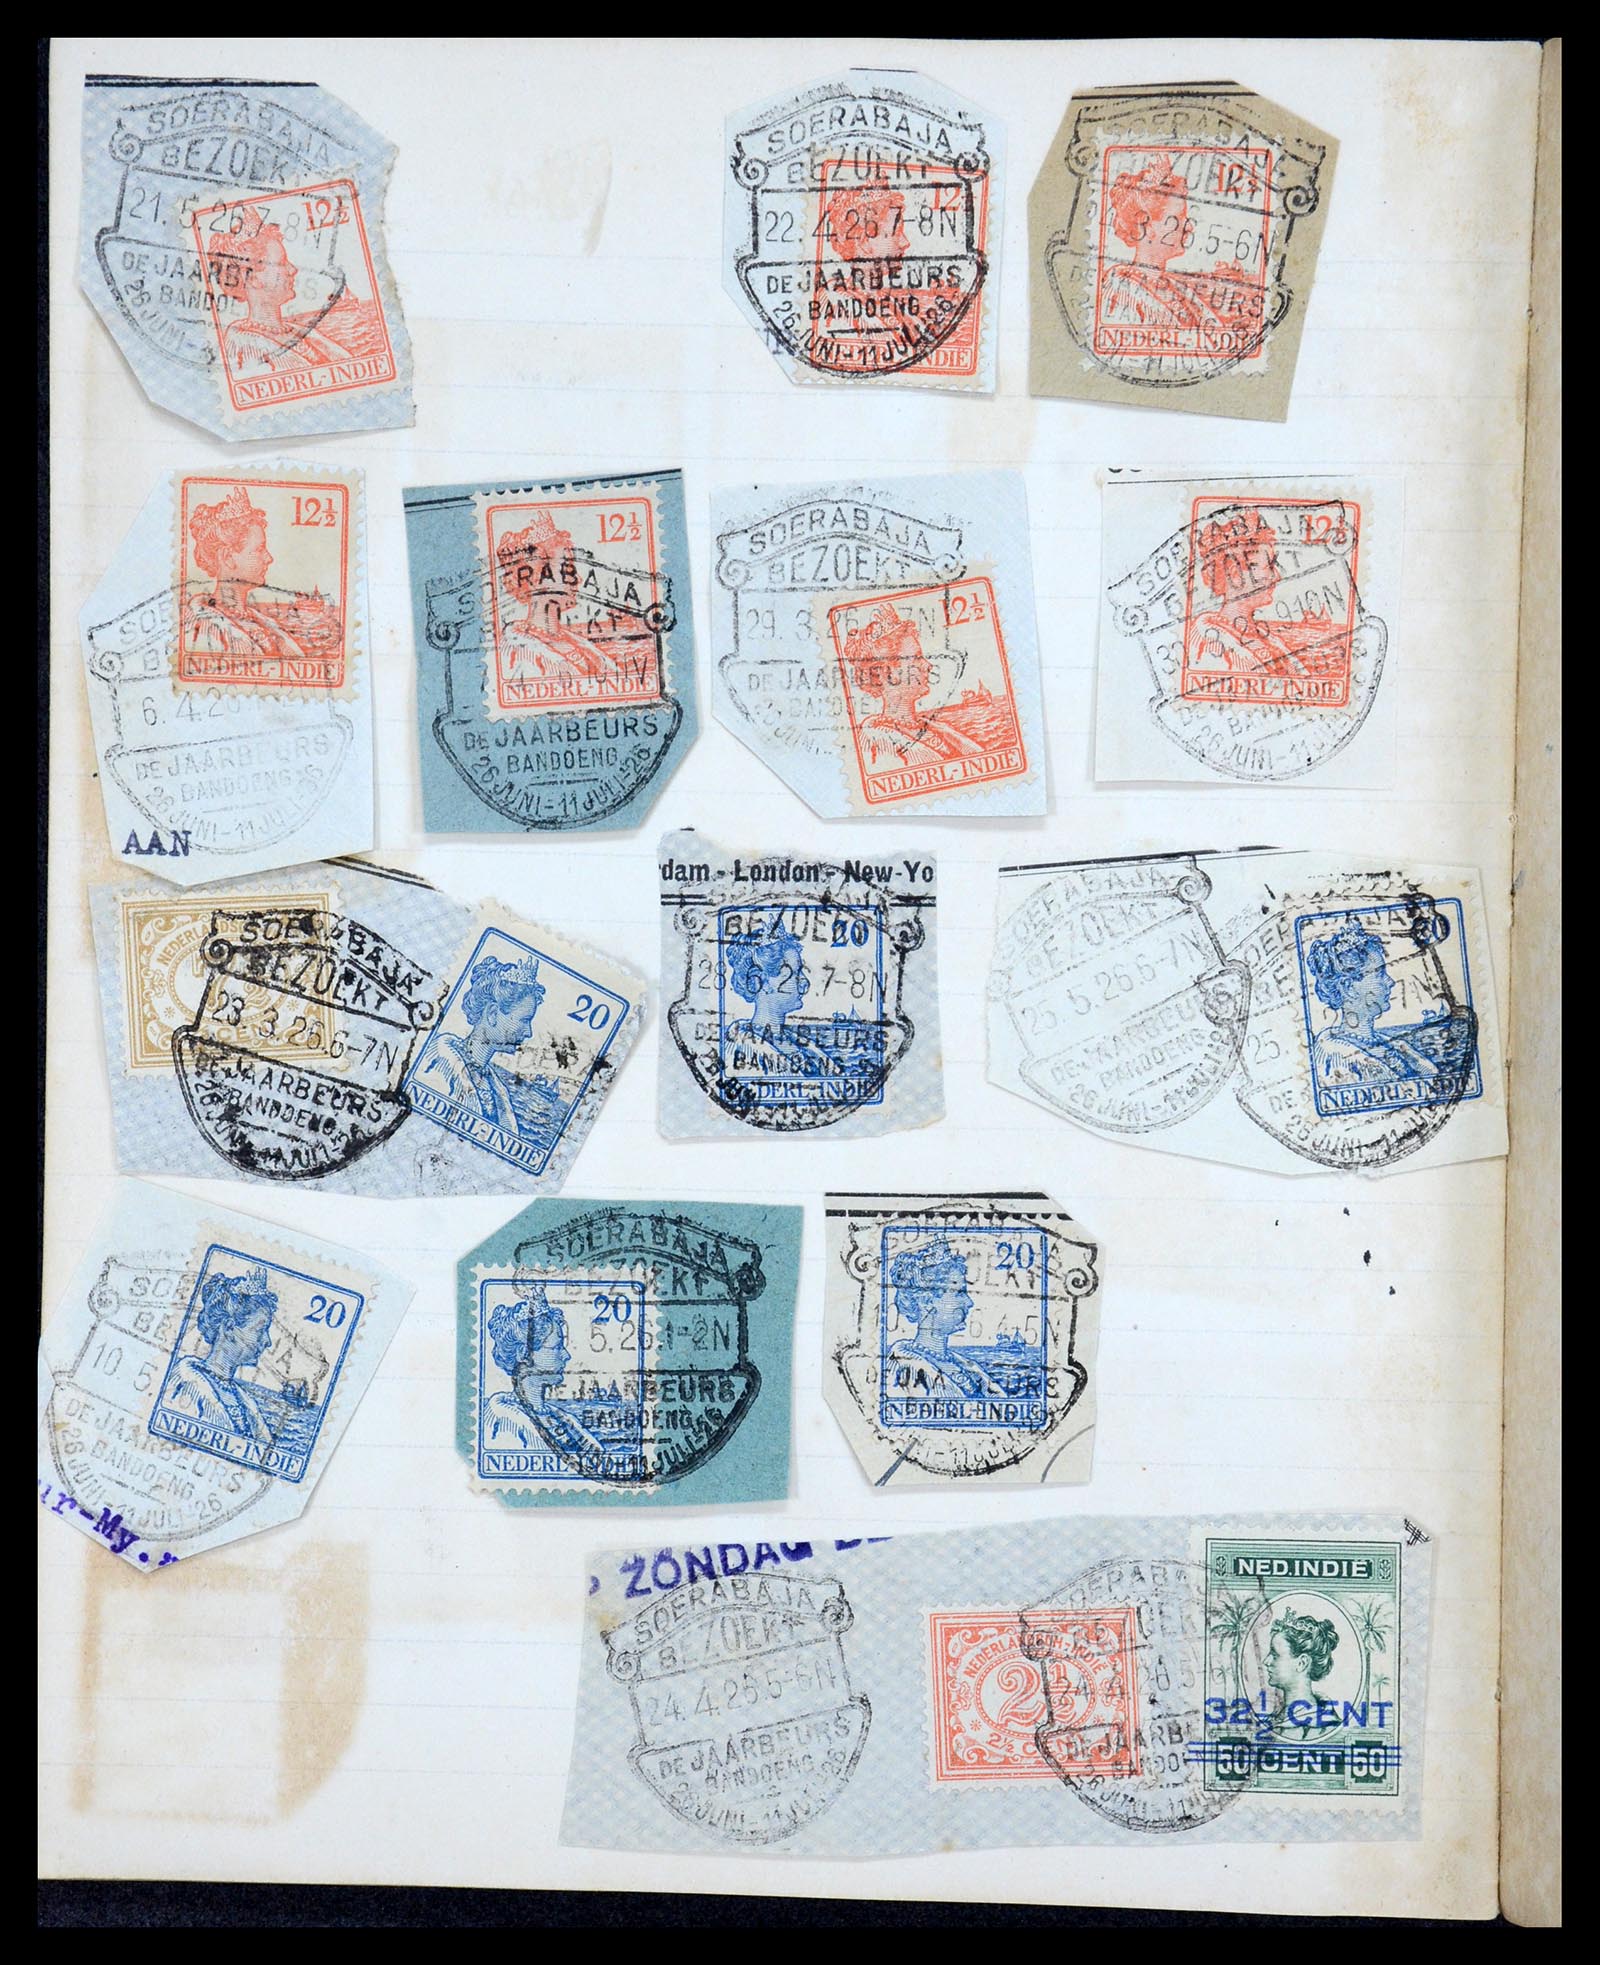 36044 018 - Stamp collection 36044 Dutch East Indies 1920-1927.